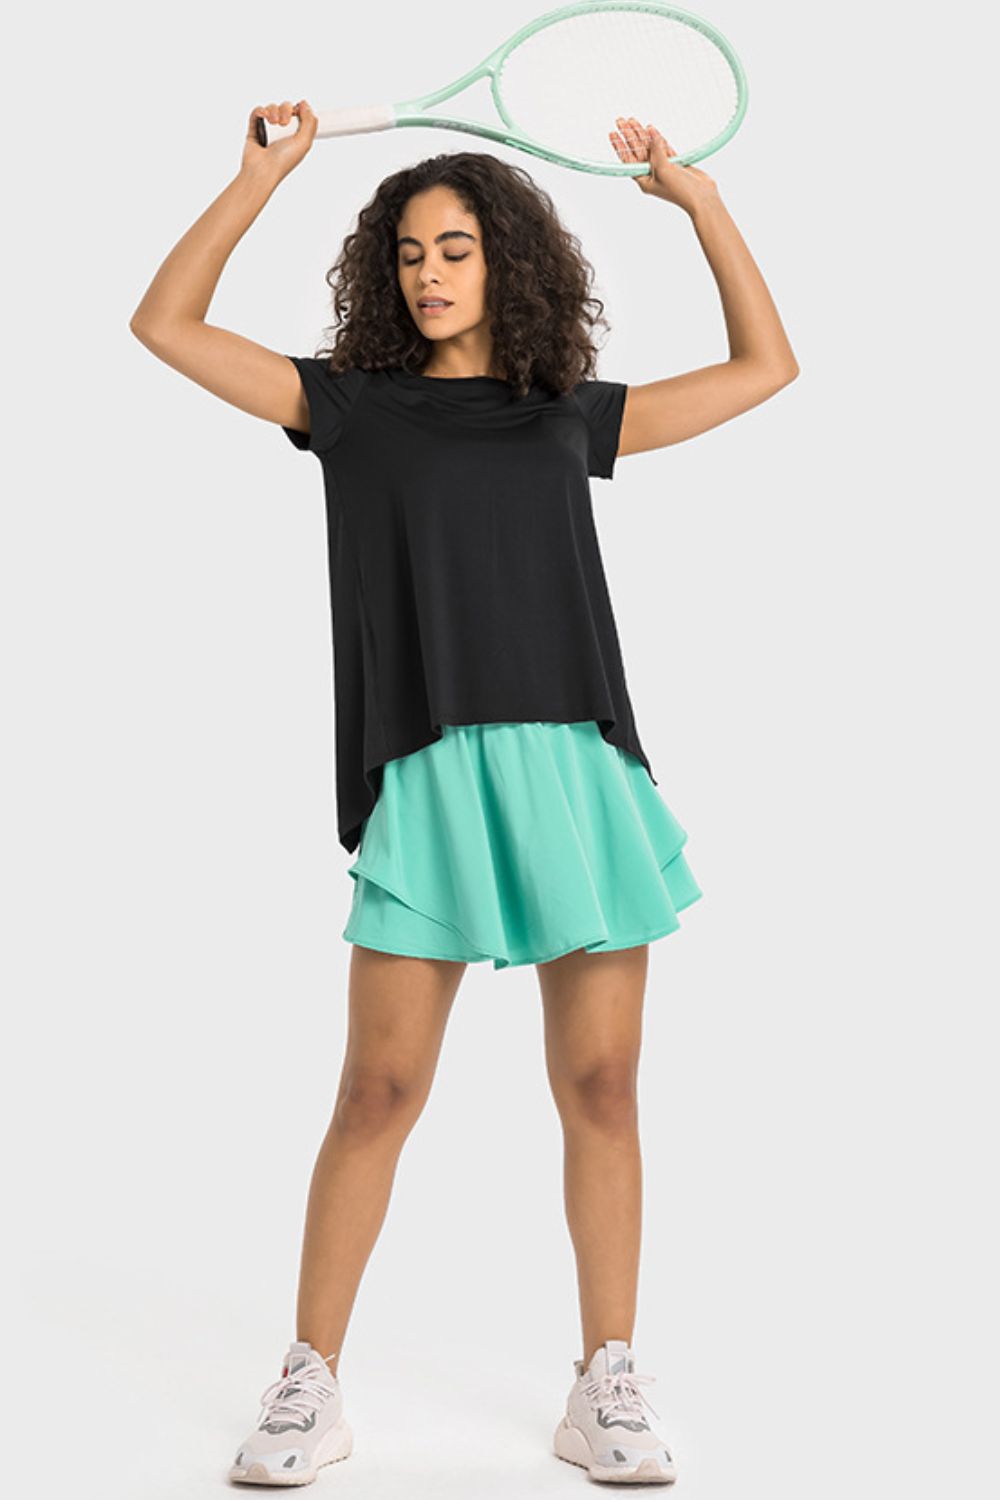 Tie Back Short Sleeve Sports Tee - Pacis and Pearls